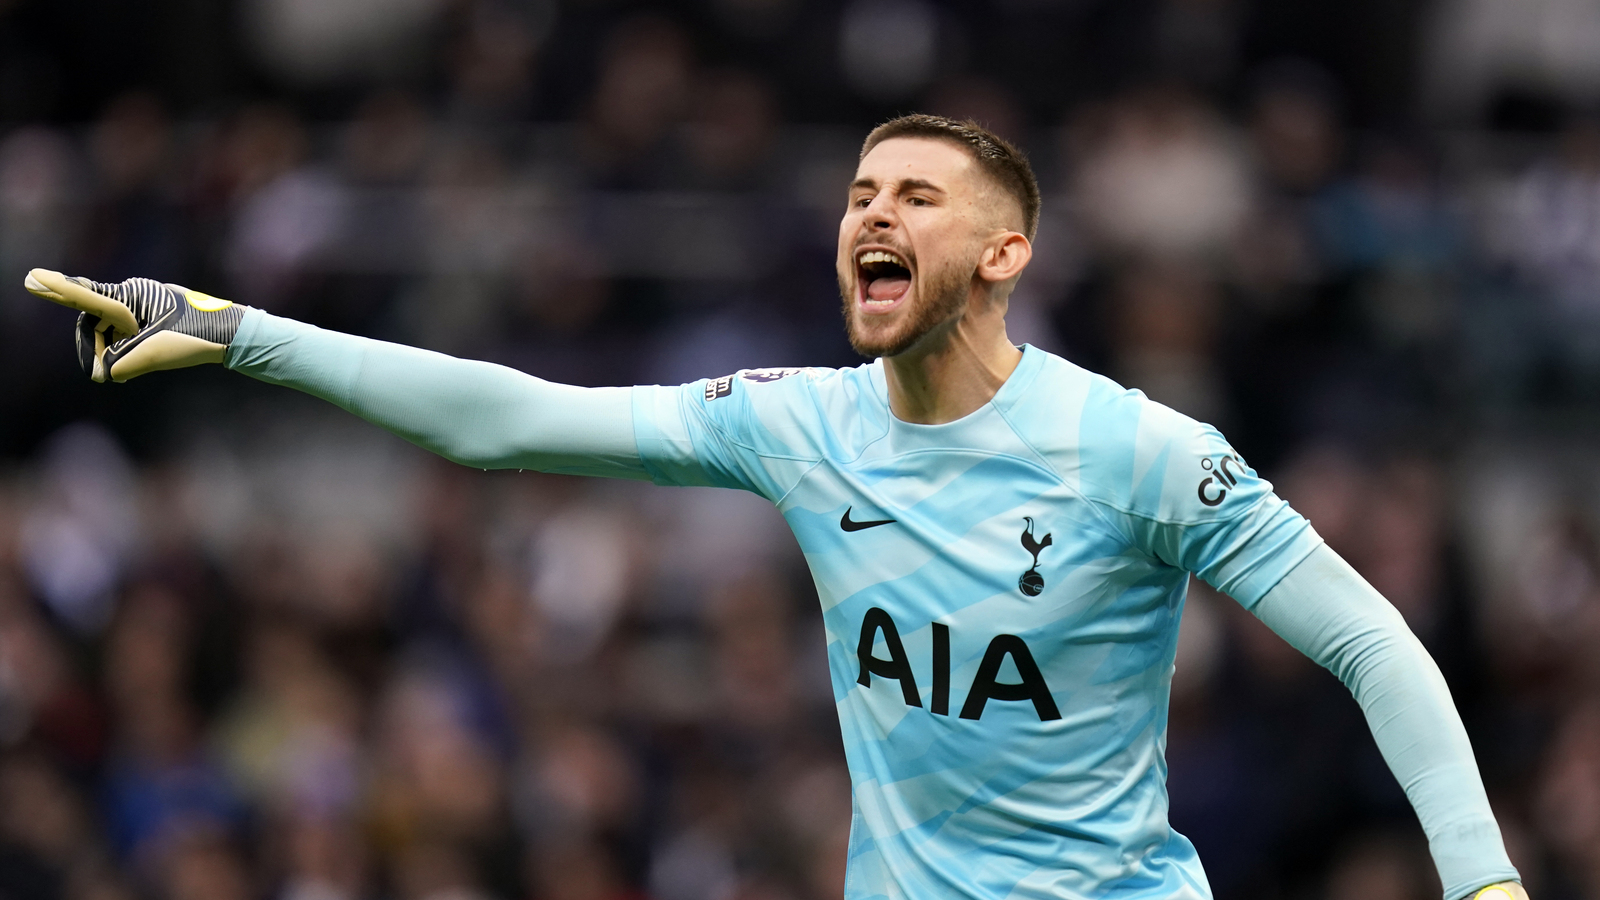 Club chief reveals how Man Utd helped Tottenham seal 27-year-old’s signing this season